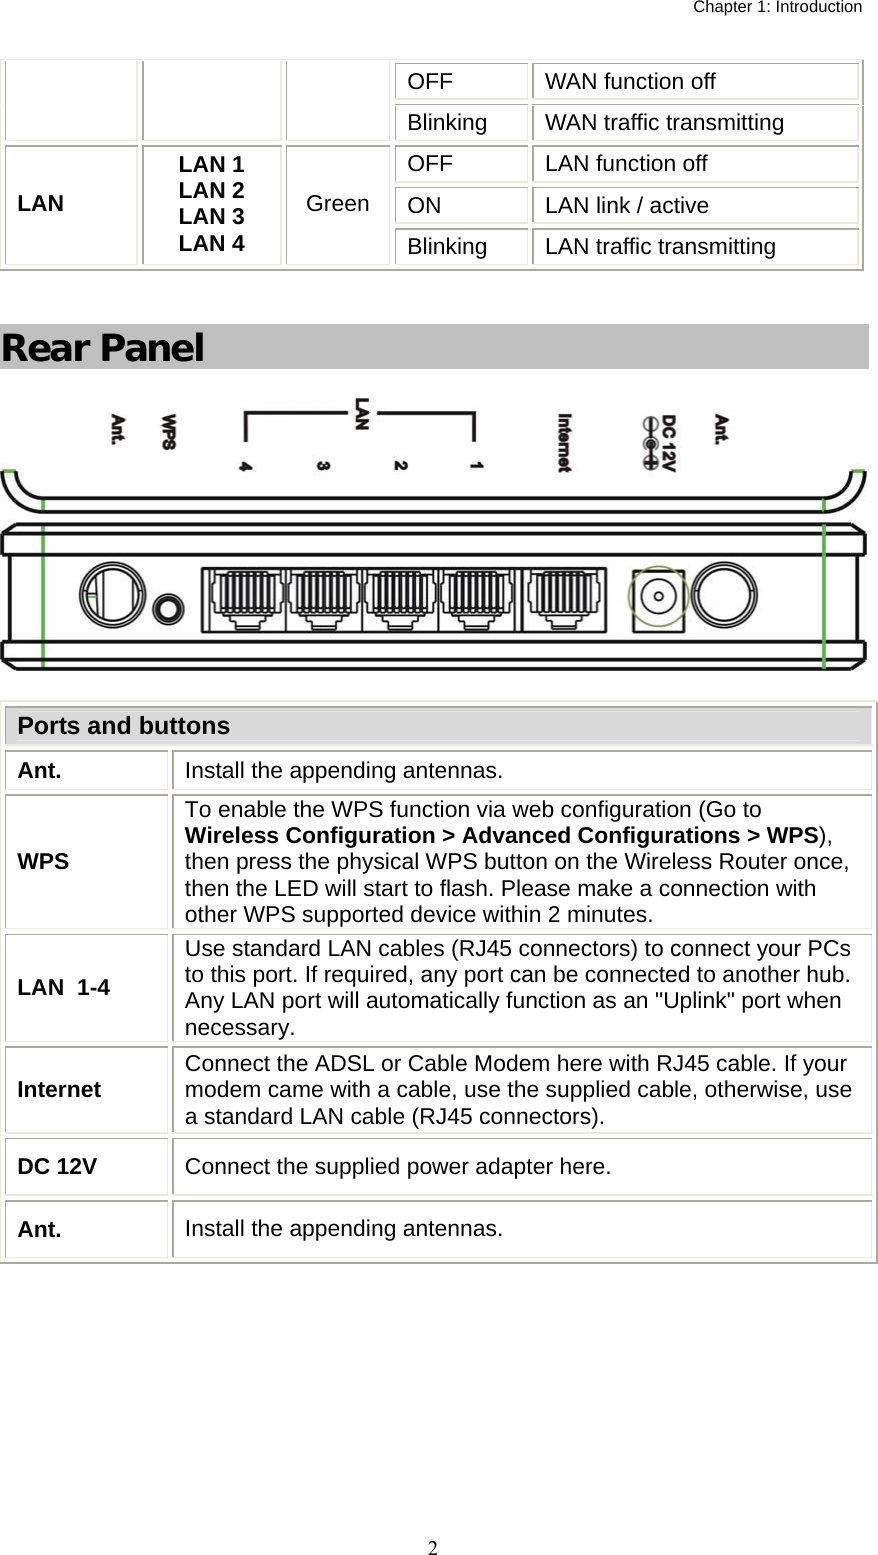   Chapter 1: Introduction  2OFF  WAN function off Blinking  WAN traffic transmitting OFF  LAN function off ON  LAN link / active LAN LAN 1 LAN 2 LAN 3 LAN 4 Green Blinking  LAN traffic transmitting  Rear Panel  Ports and buttons Ant.  Install the appending antennas. WPS  To enable the WPS function via web configuration (Go to Wireless Configuration &gt; Advanced Configurations &gt; WPS), then press the physical WPS button on the Wireless Router once, then the LED will start to flash. Please make a connection with other WPS supported device within 2 minutes.  LAN  1-4 Use standard LAN cables (RJ45 connectors) to connect your PCs to this port. If required, any port can be connected to another hub. Any LAN port will automatically function as an &quot;Uplink&quot; port when necessary. Internet  Connect the ADSL or Cable Modem here with RJ45 cable. If your modem came with a cable, use the supplied cable, otherwise, use a standard LAN cable (RJ45 connectors). DC 12V  Connect the supplied power adapter here. Ant.  Install the appending antennas.  